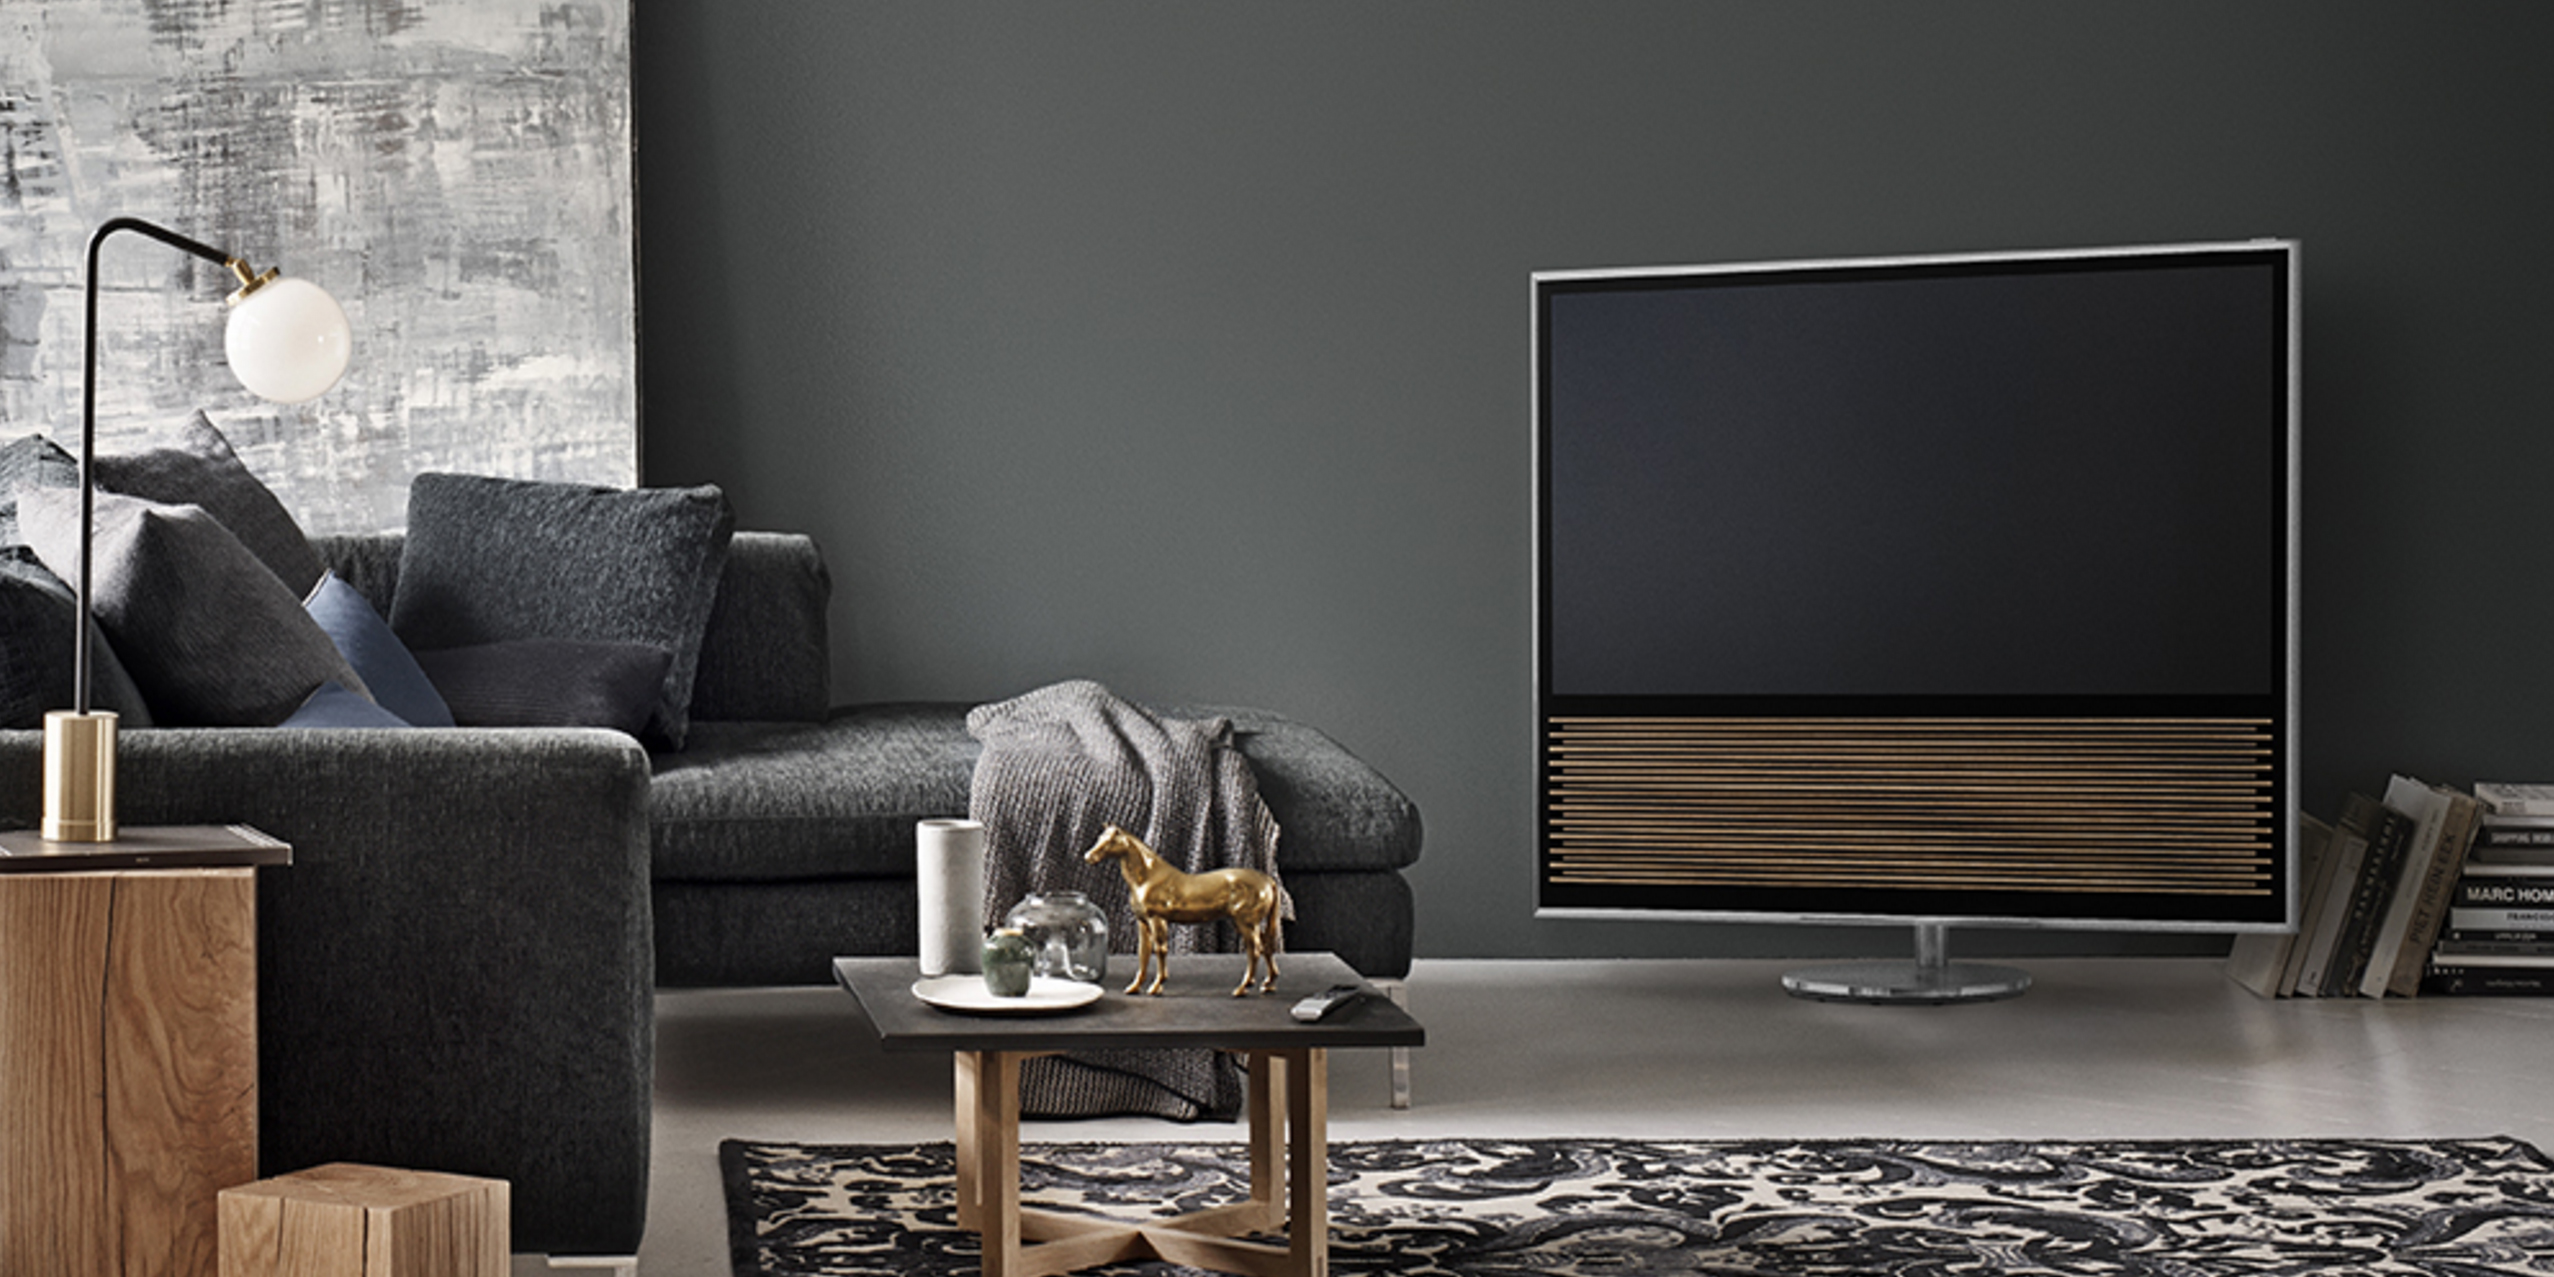 Bang & Olufsen's new 4K Android TV-powered BeoVision 14 is a stunner if you  can stomach the price tag